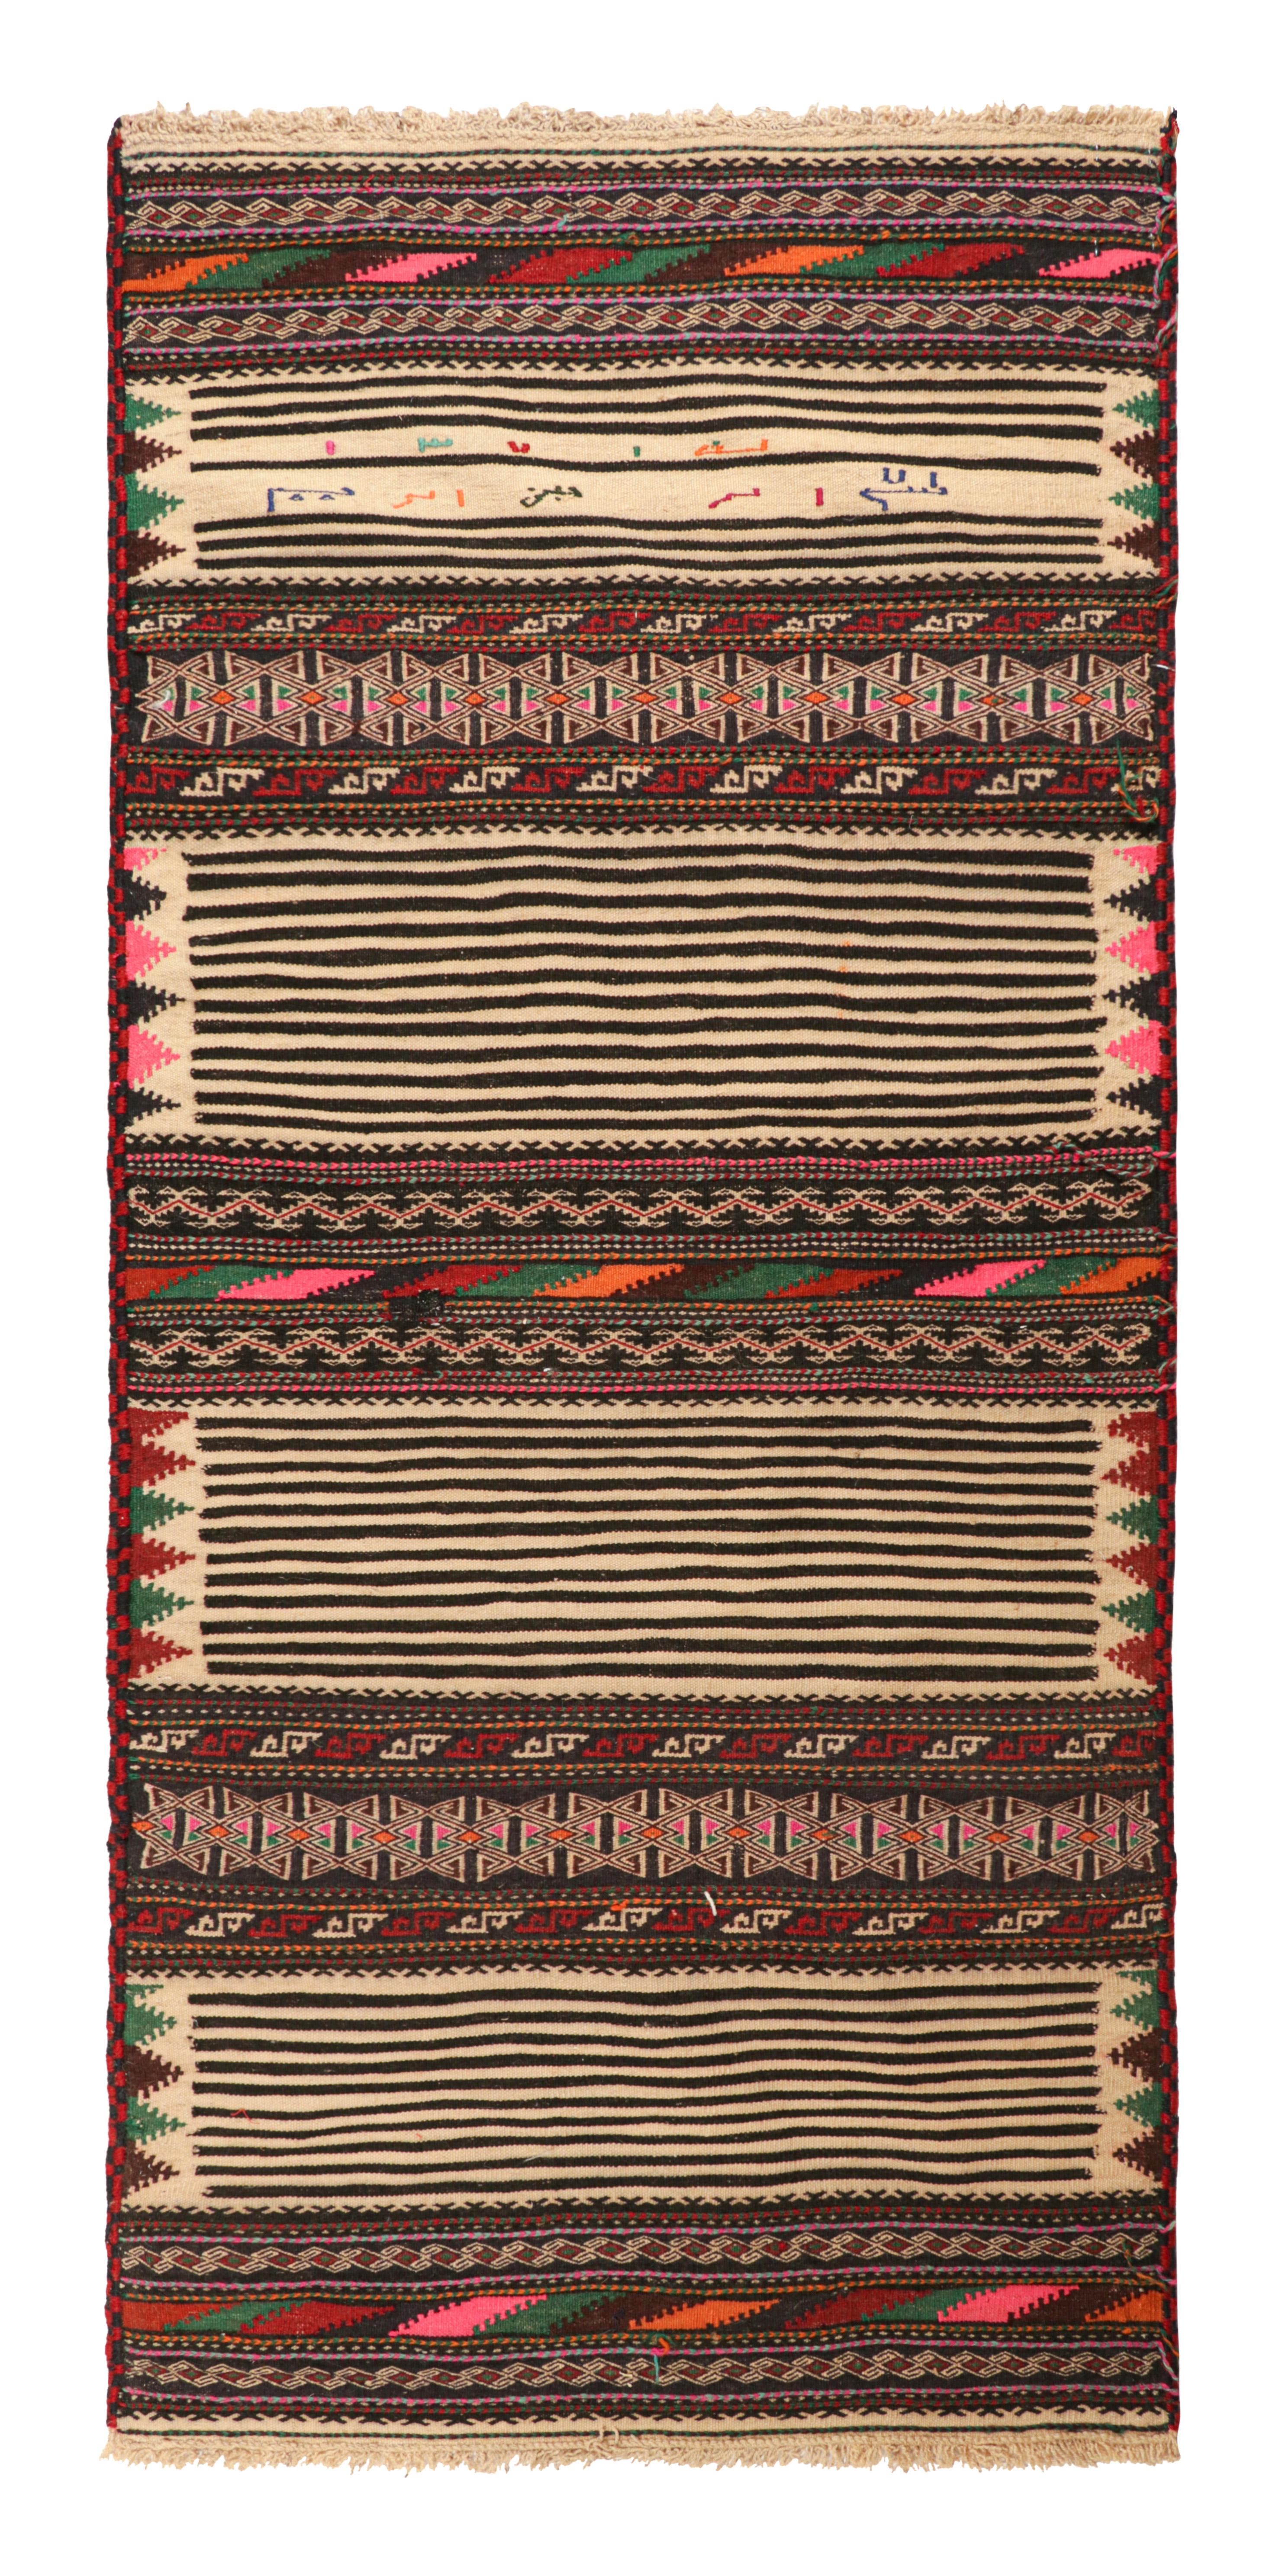 Vintage Afghan Kilim with Polychromatic Geometric Patterns, from Rug & Kilim For Sale